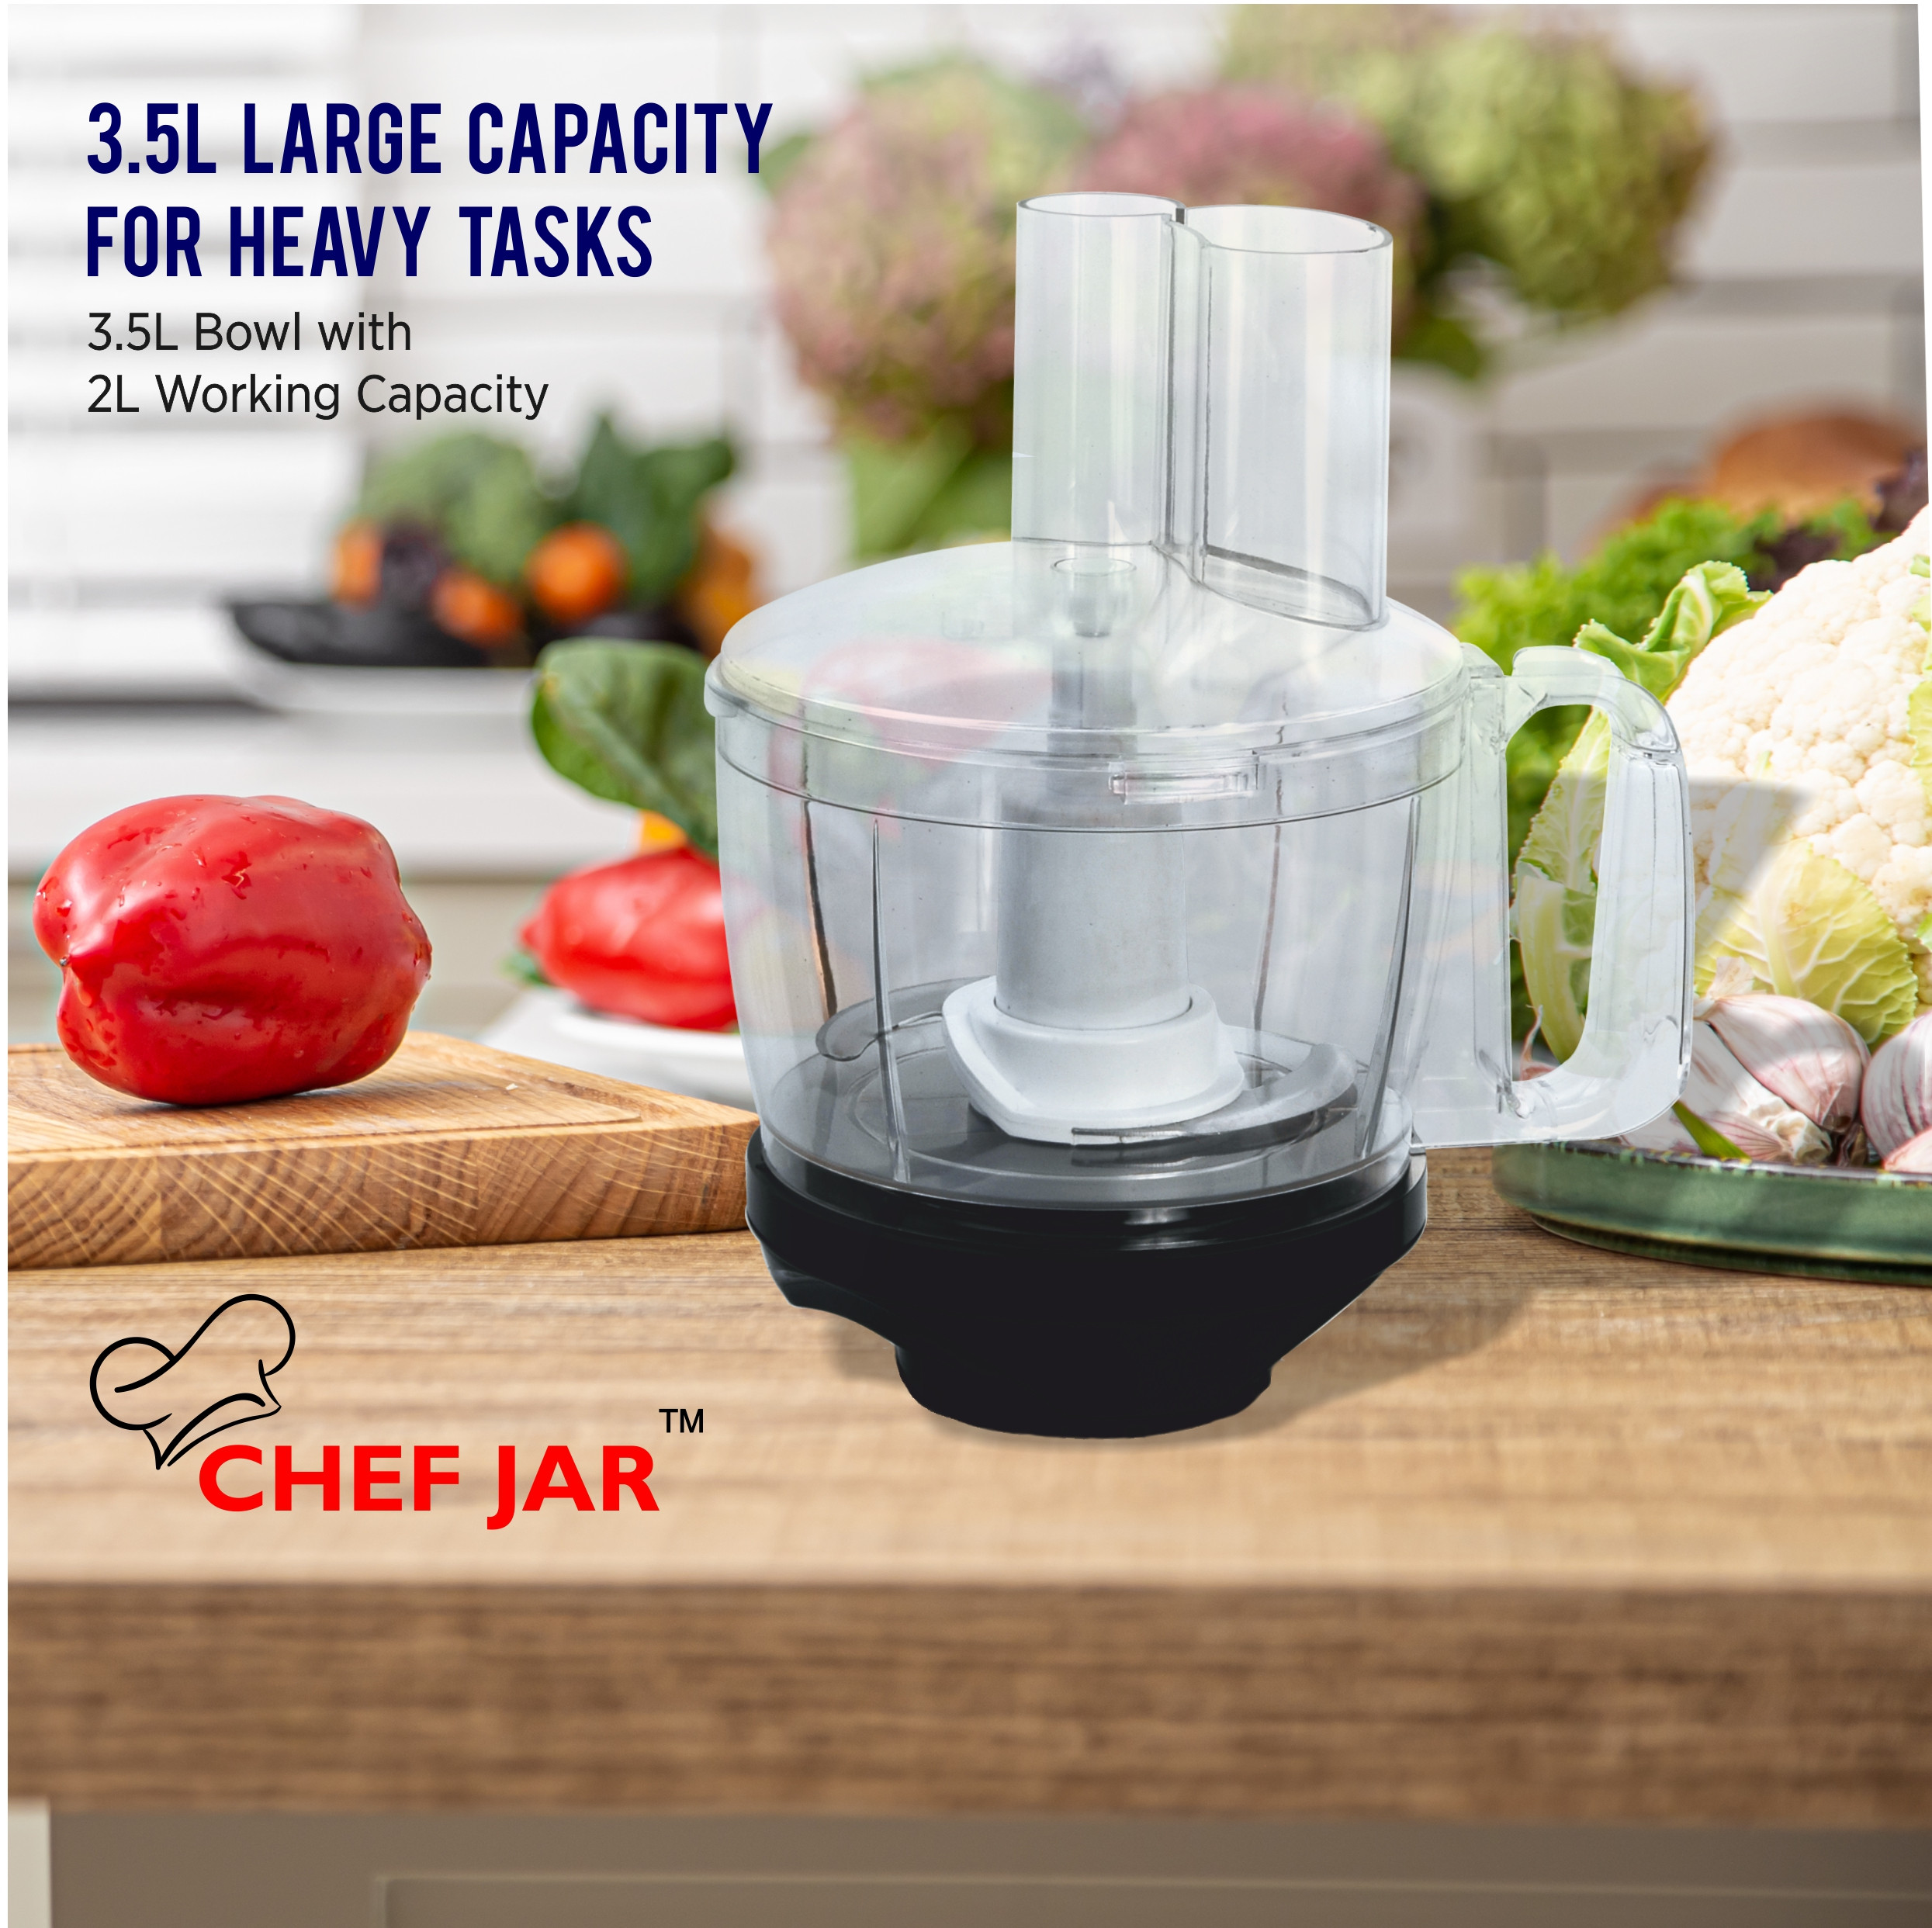 bajaj-bravo-plus-500w-indian-mixer-grinder-with-special-chef-jar-stainless-steel-jars-indian-mixer-grinder-spice-coffee-grinder-110v-for-use-in-canada-usa16